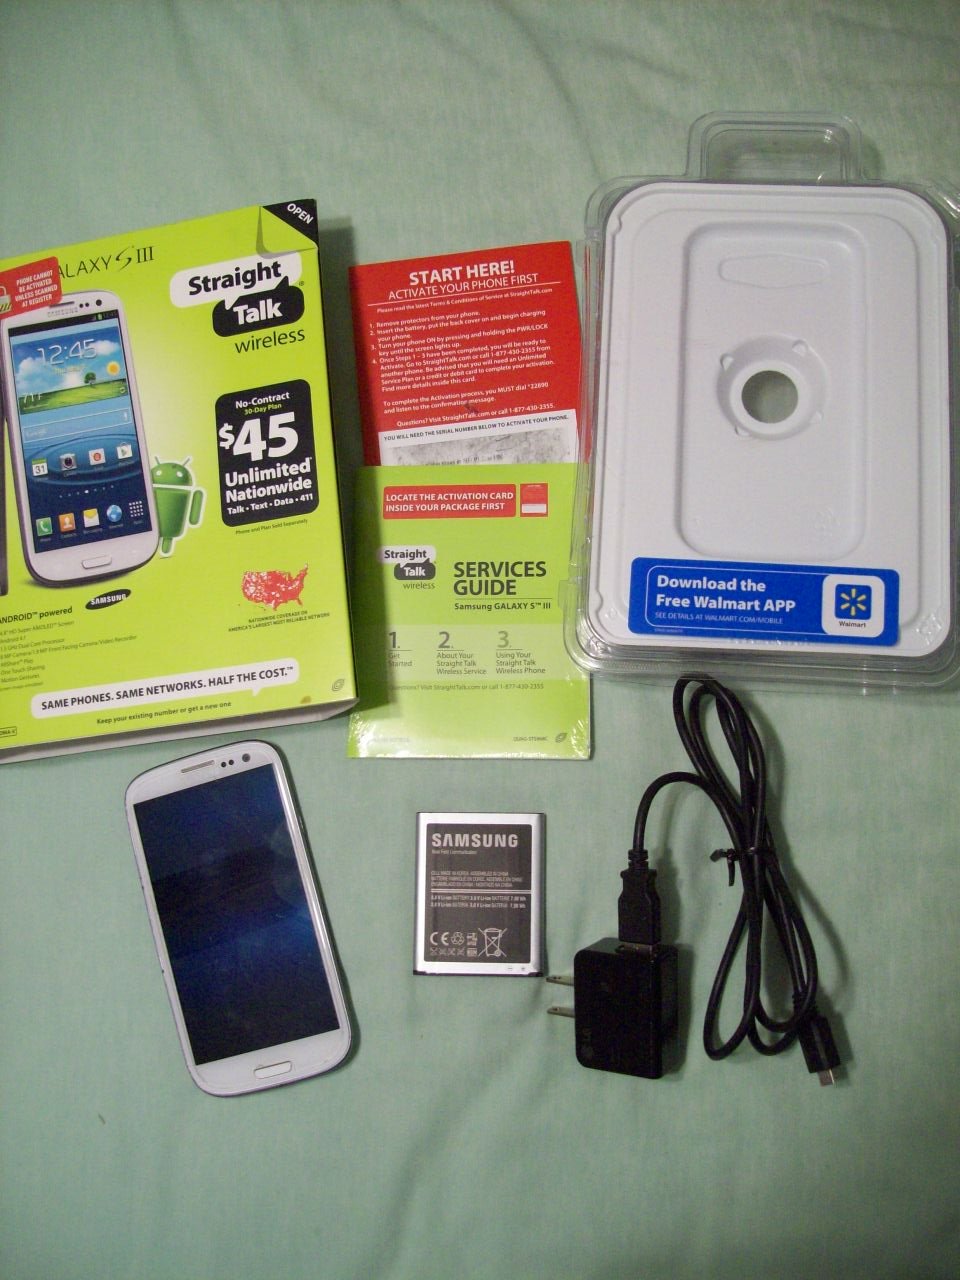 Samsung Galaxy SIII S3 White with USB/AC Wall Plug Charger Cord needs Re-Setting and/or REPAIR